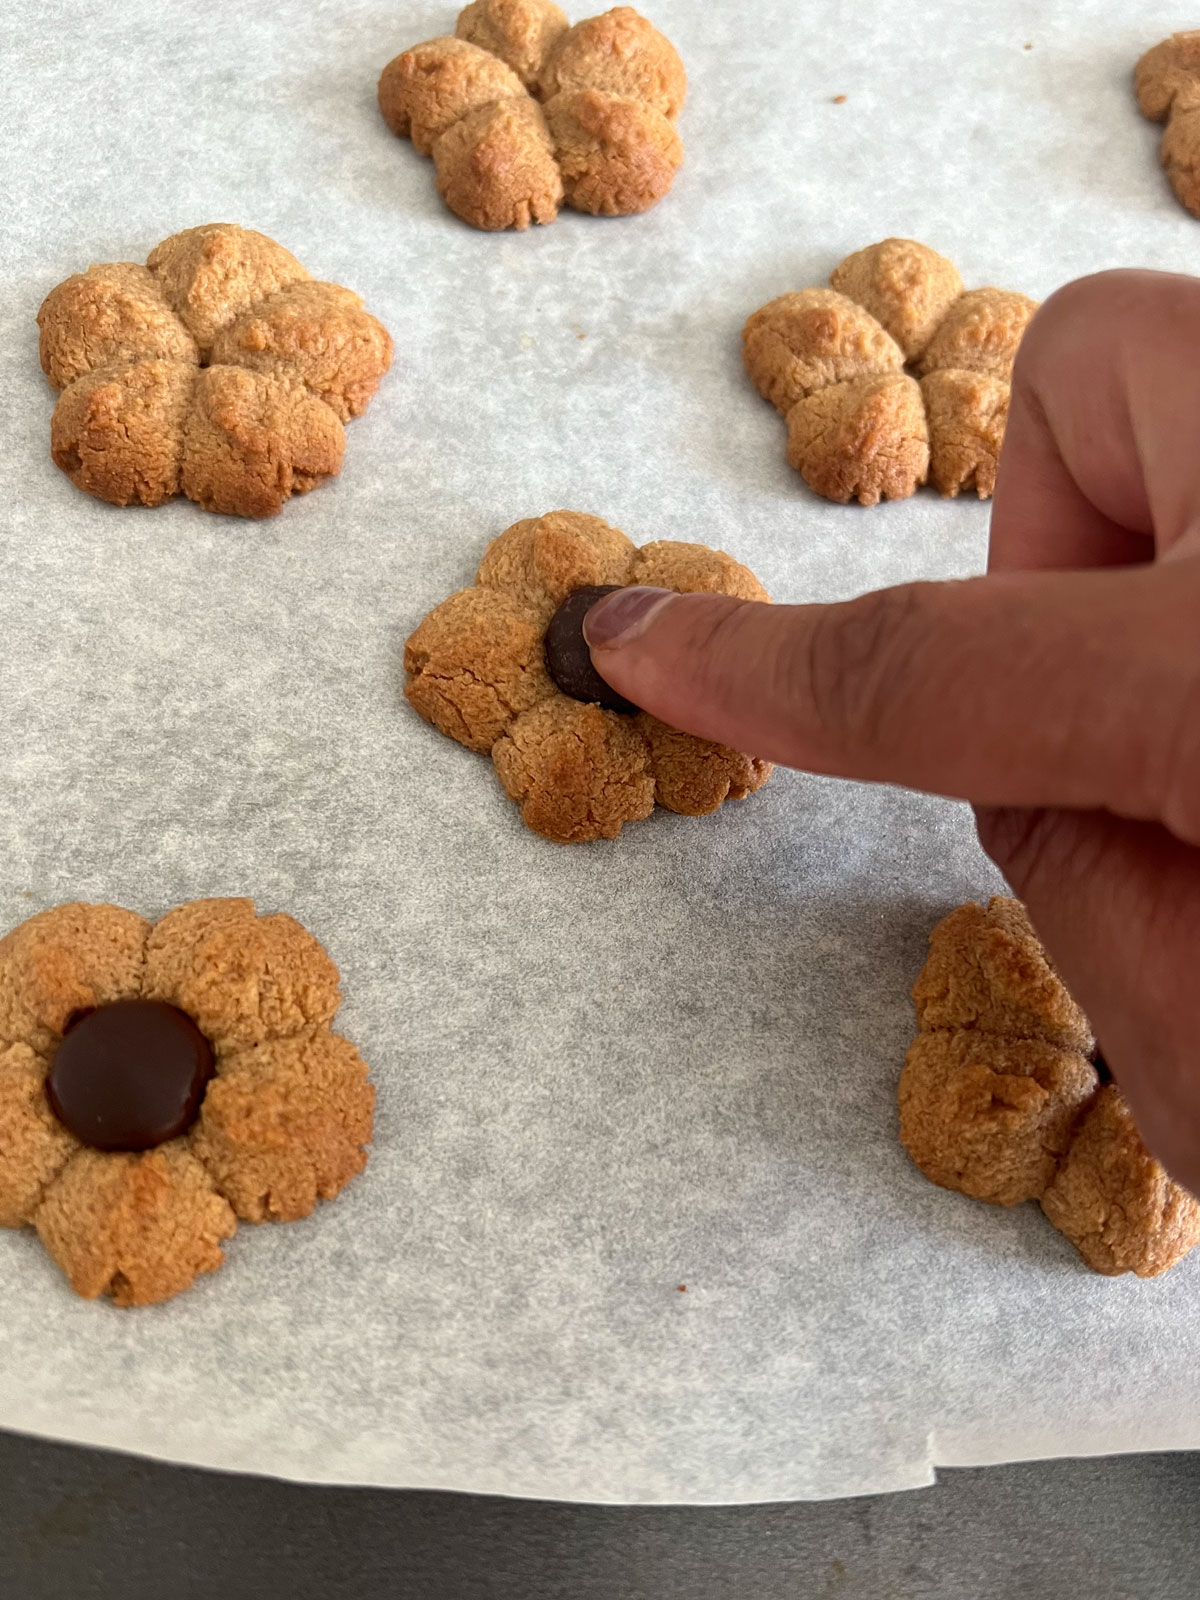 Chocolate baking chip being added to center of baked flower shaped peanut butter cookie.